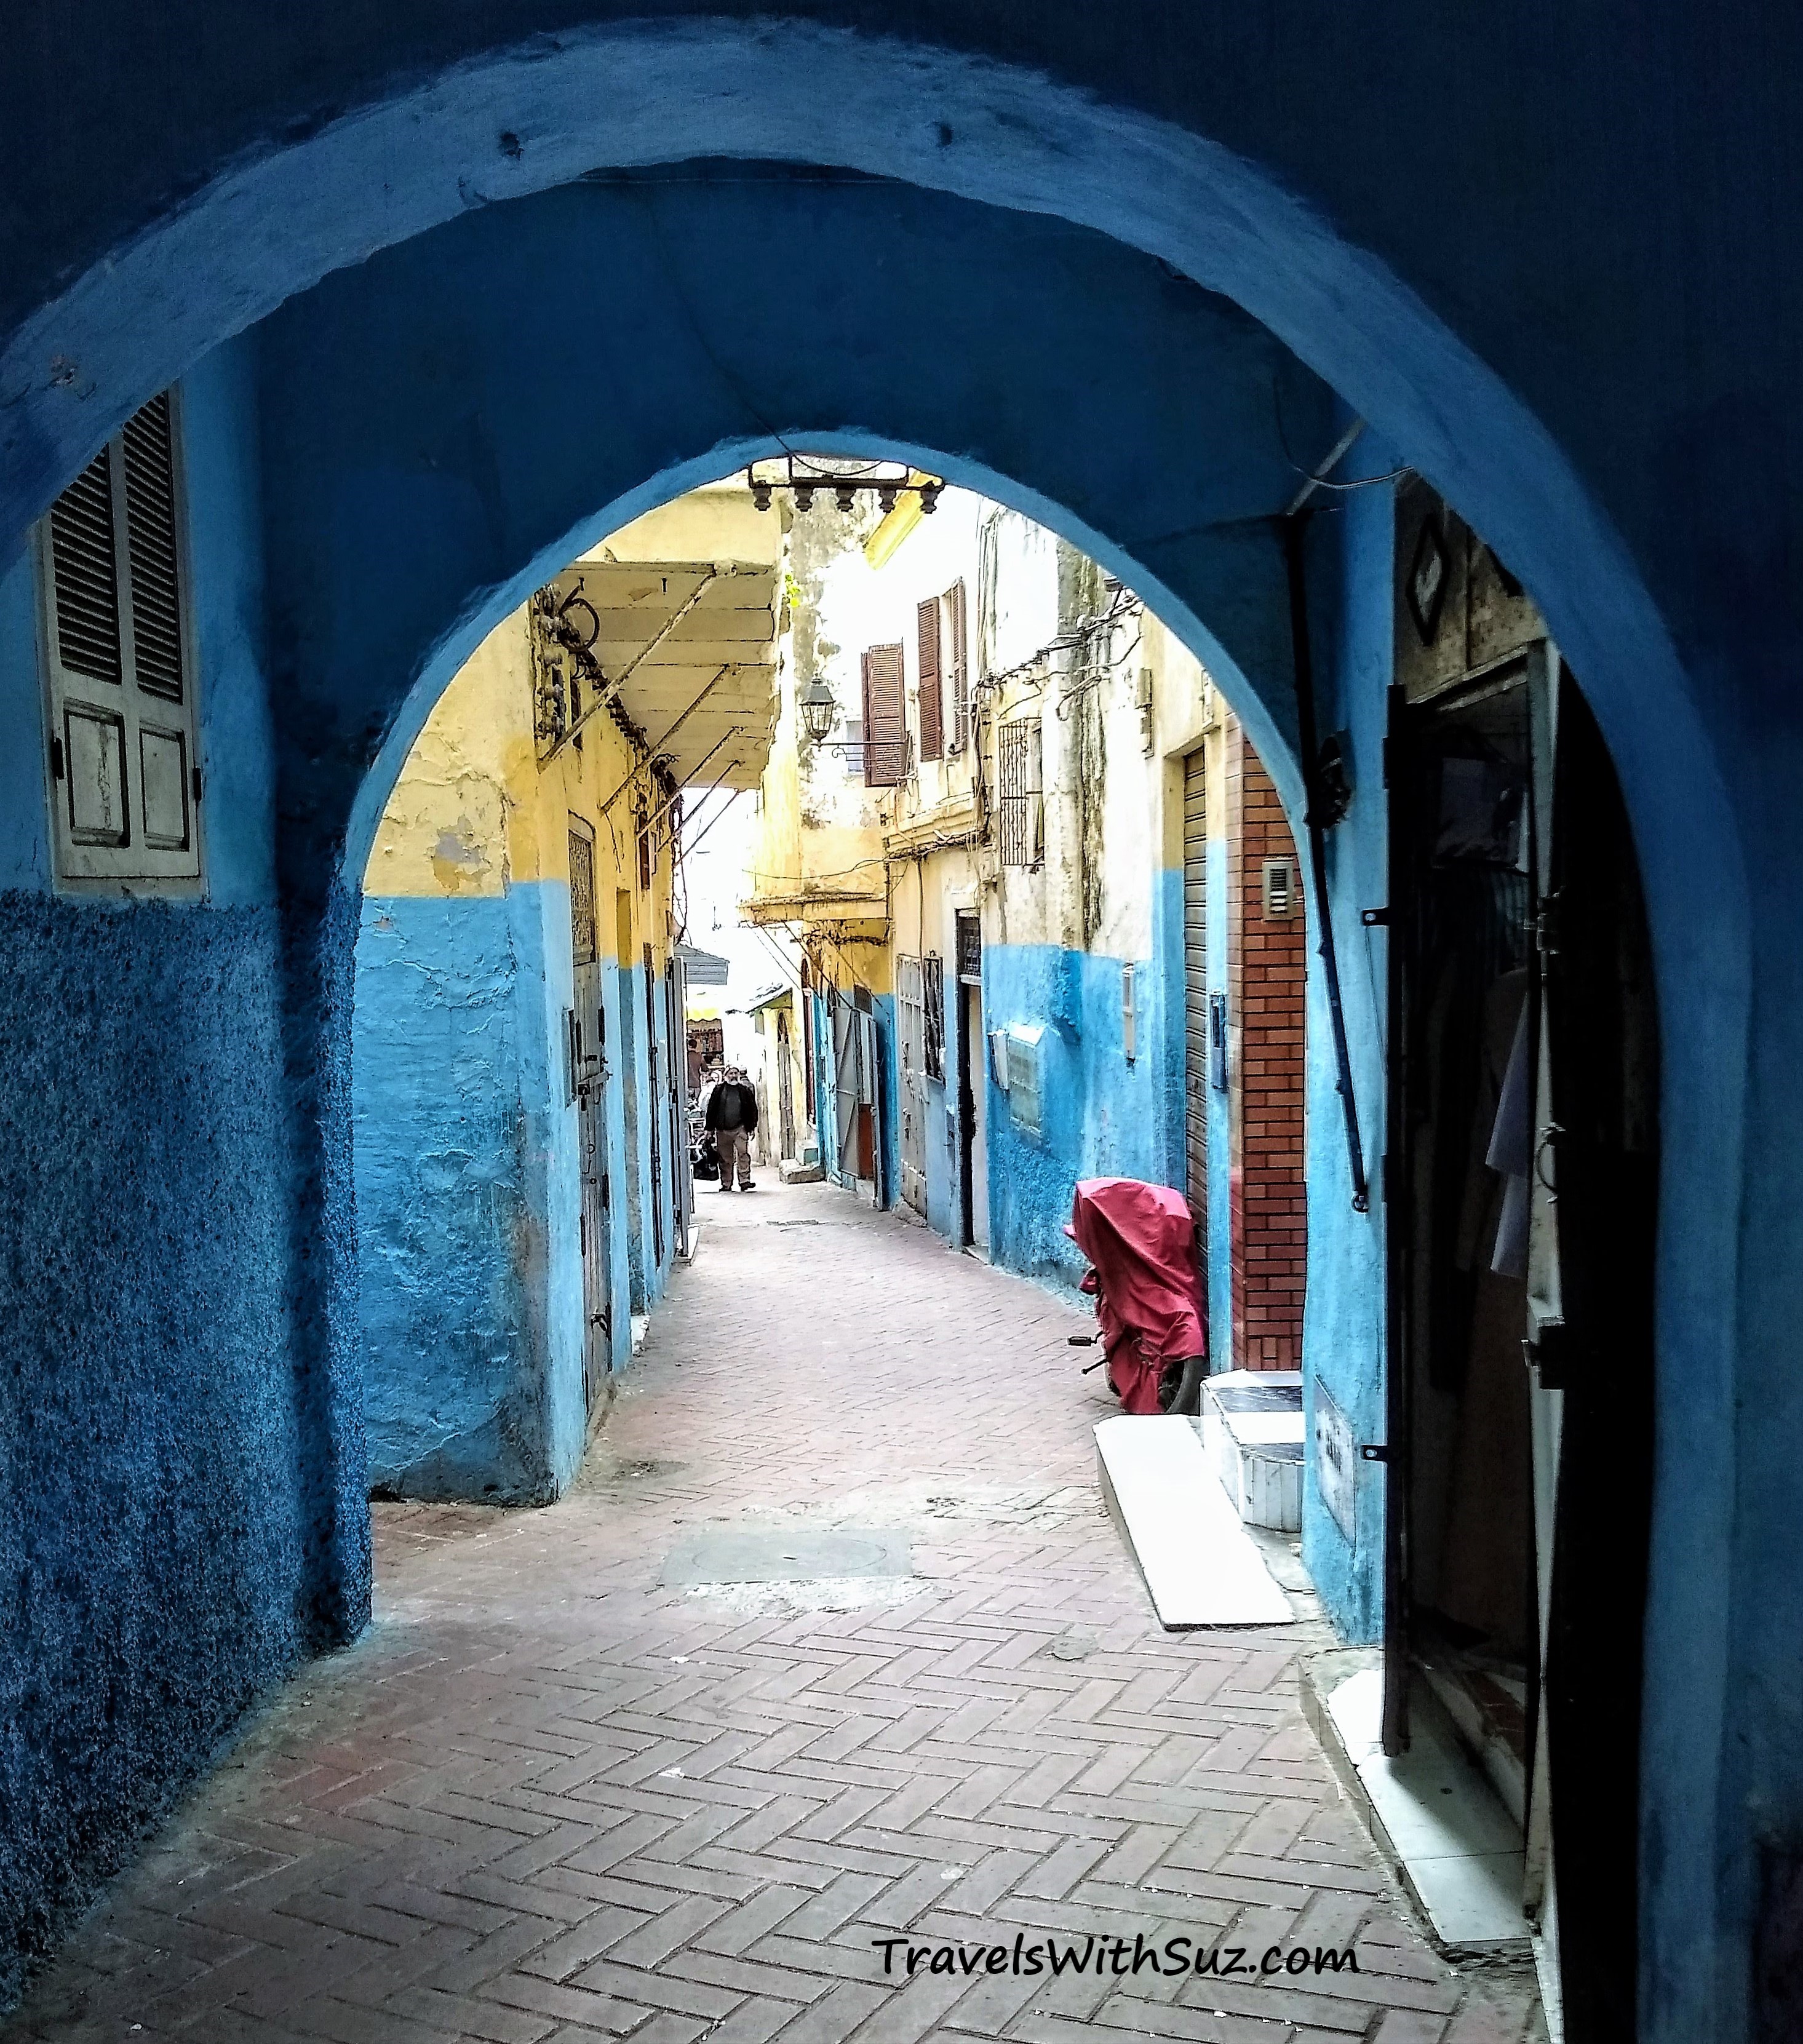 An alley in the Tangier Medina with archways